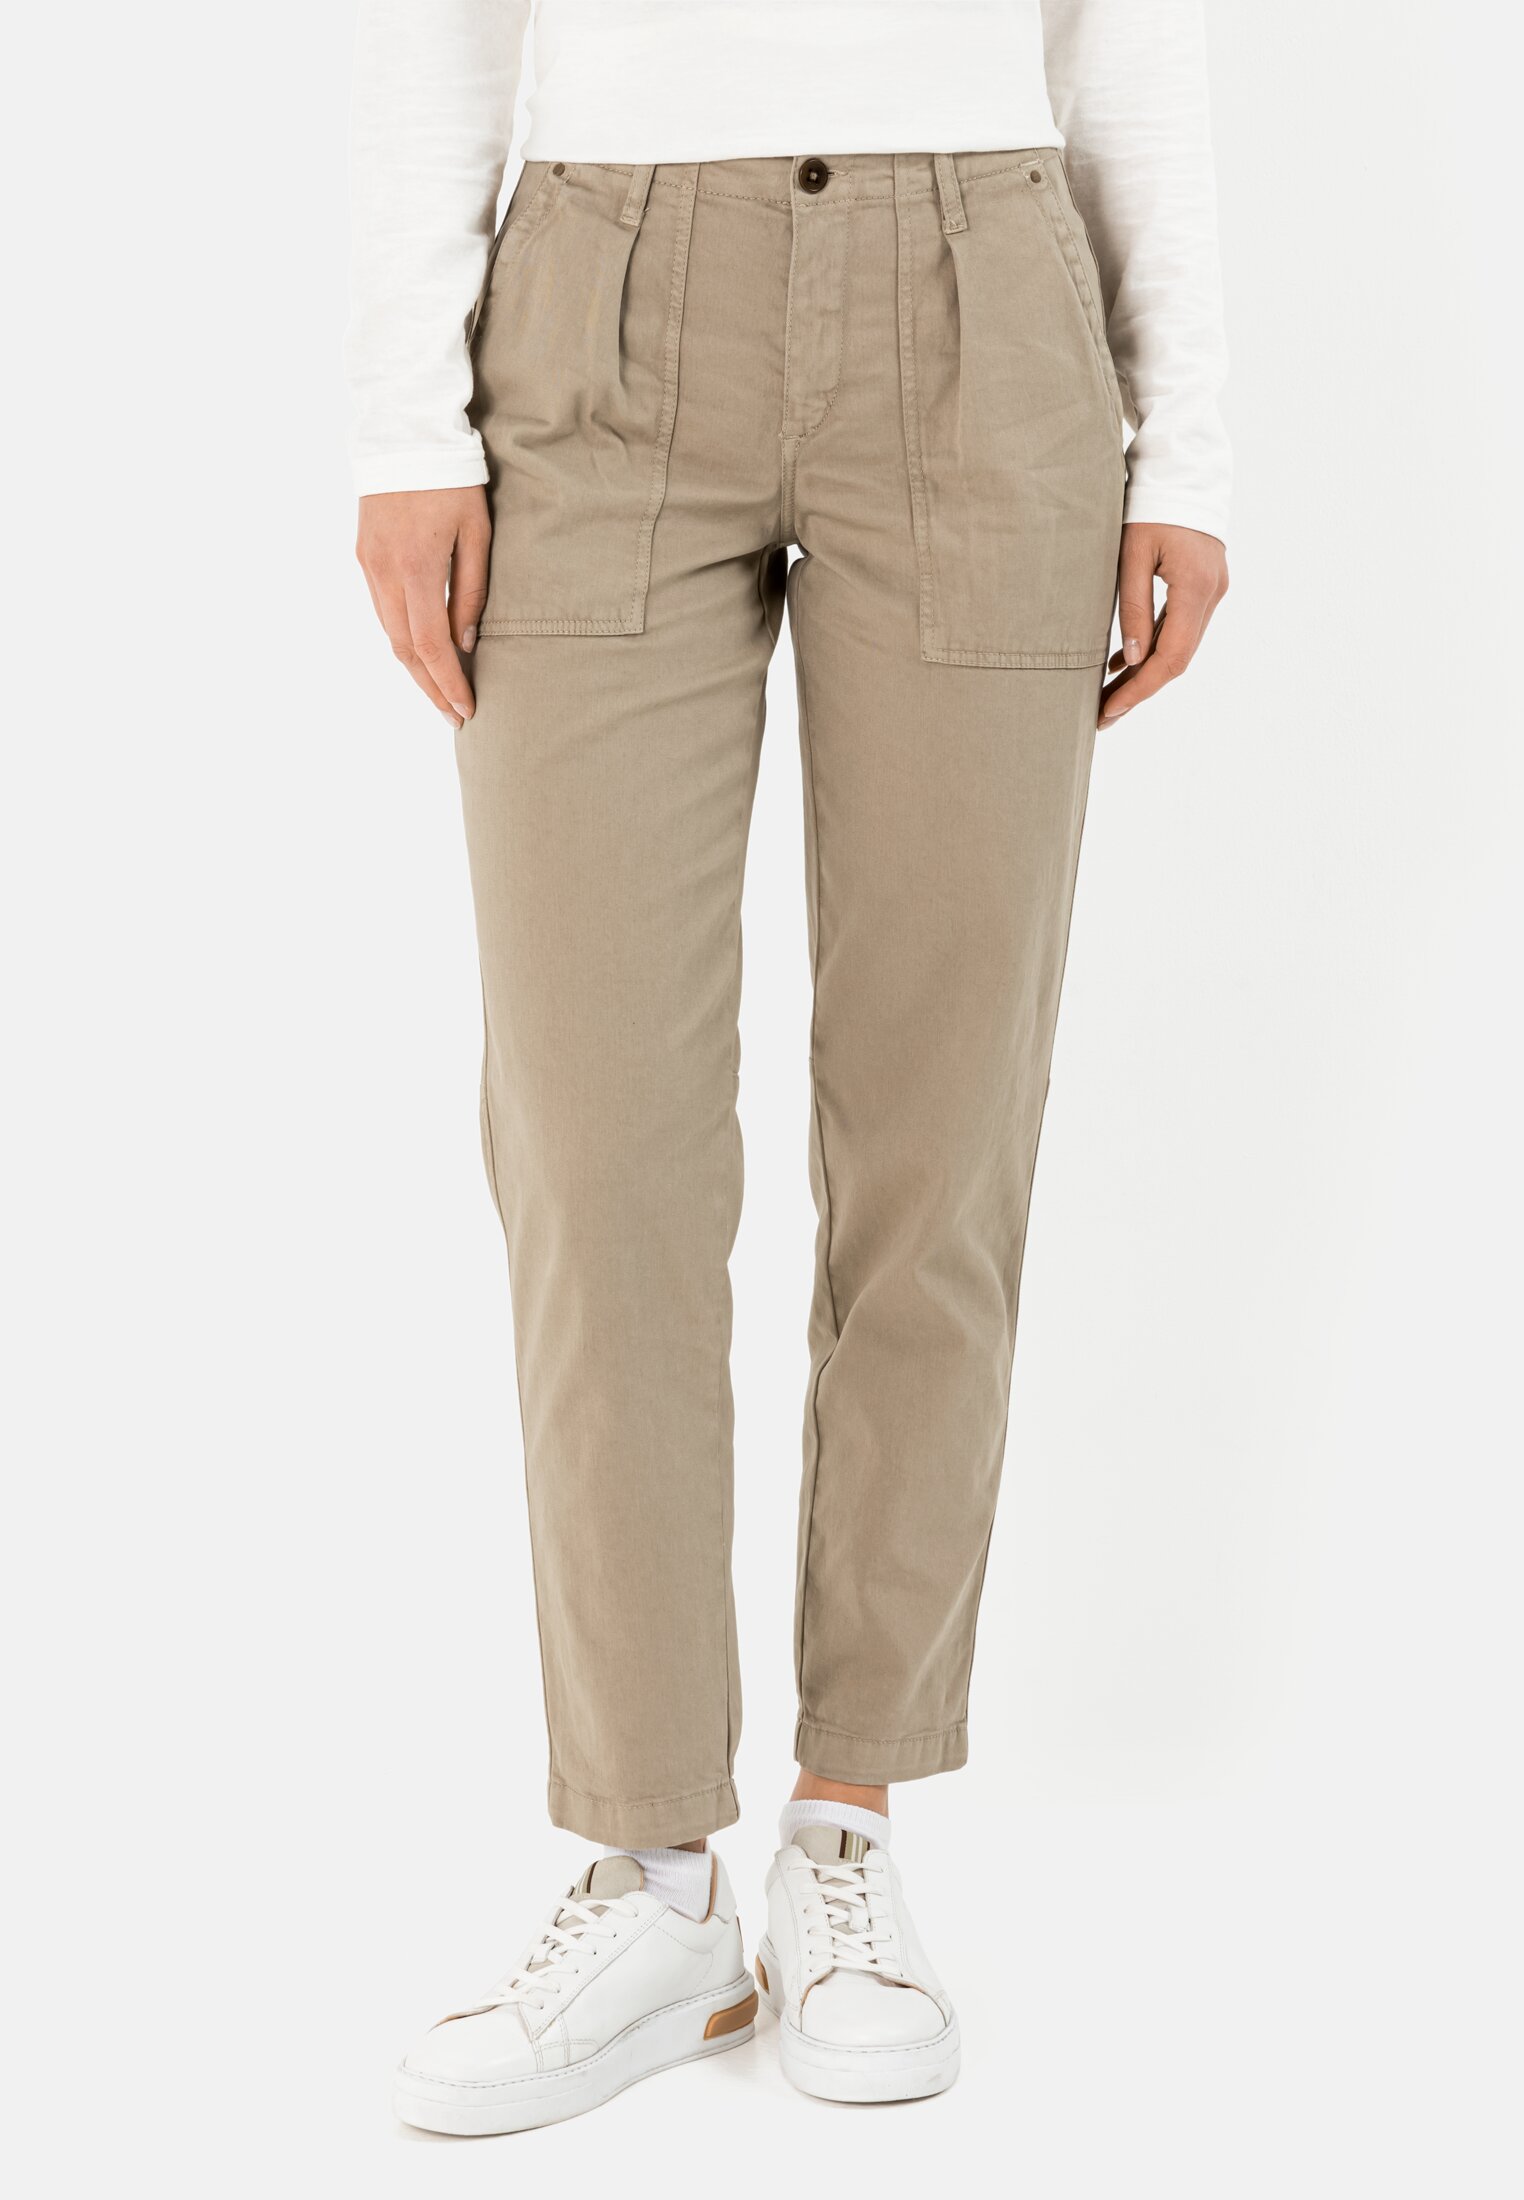 Camel Active Casual worker pants in relaxed fit